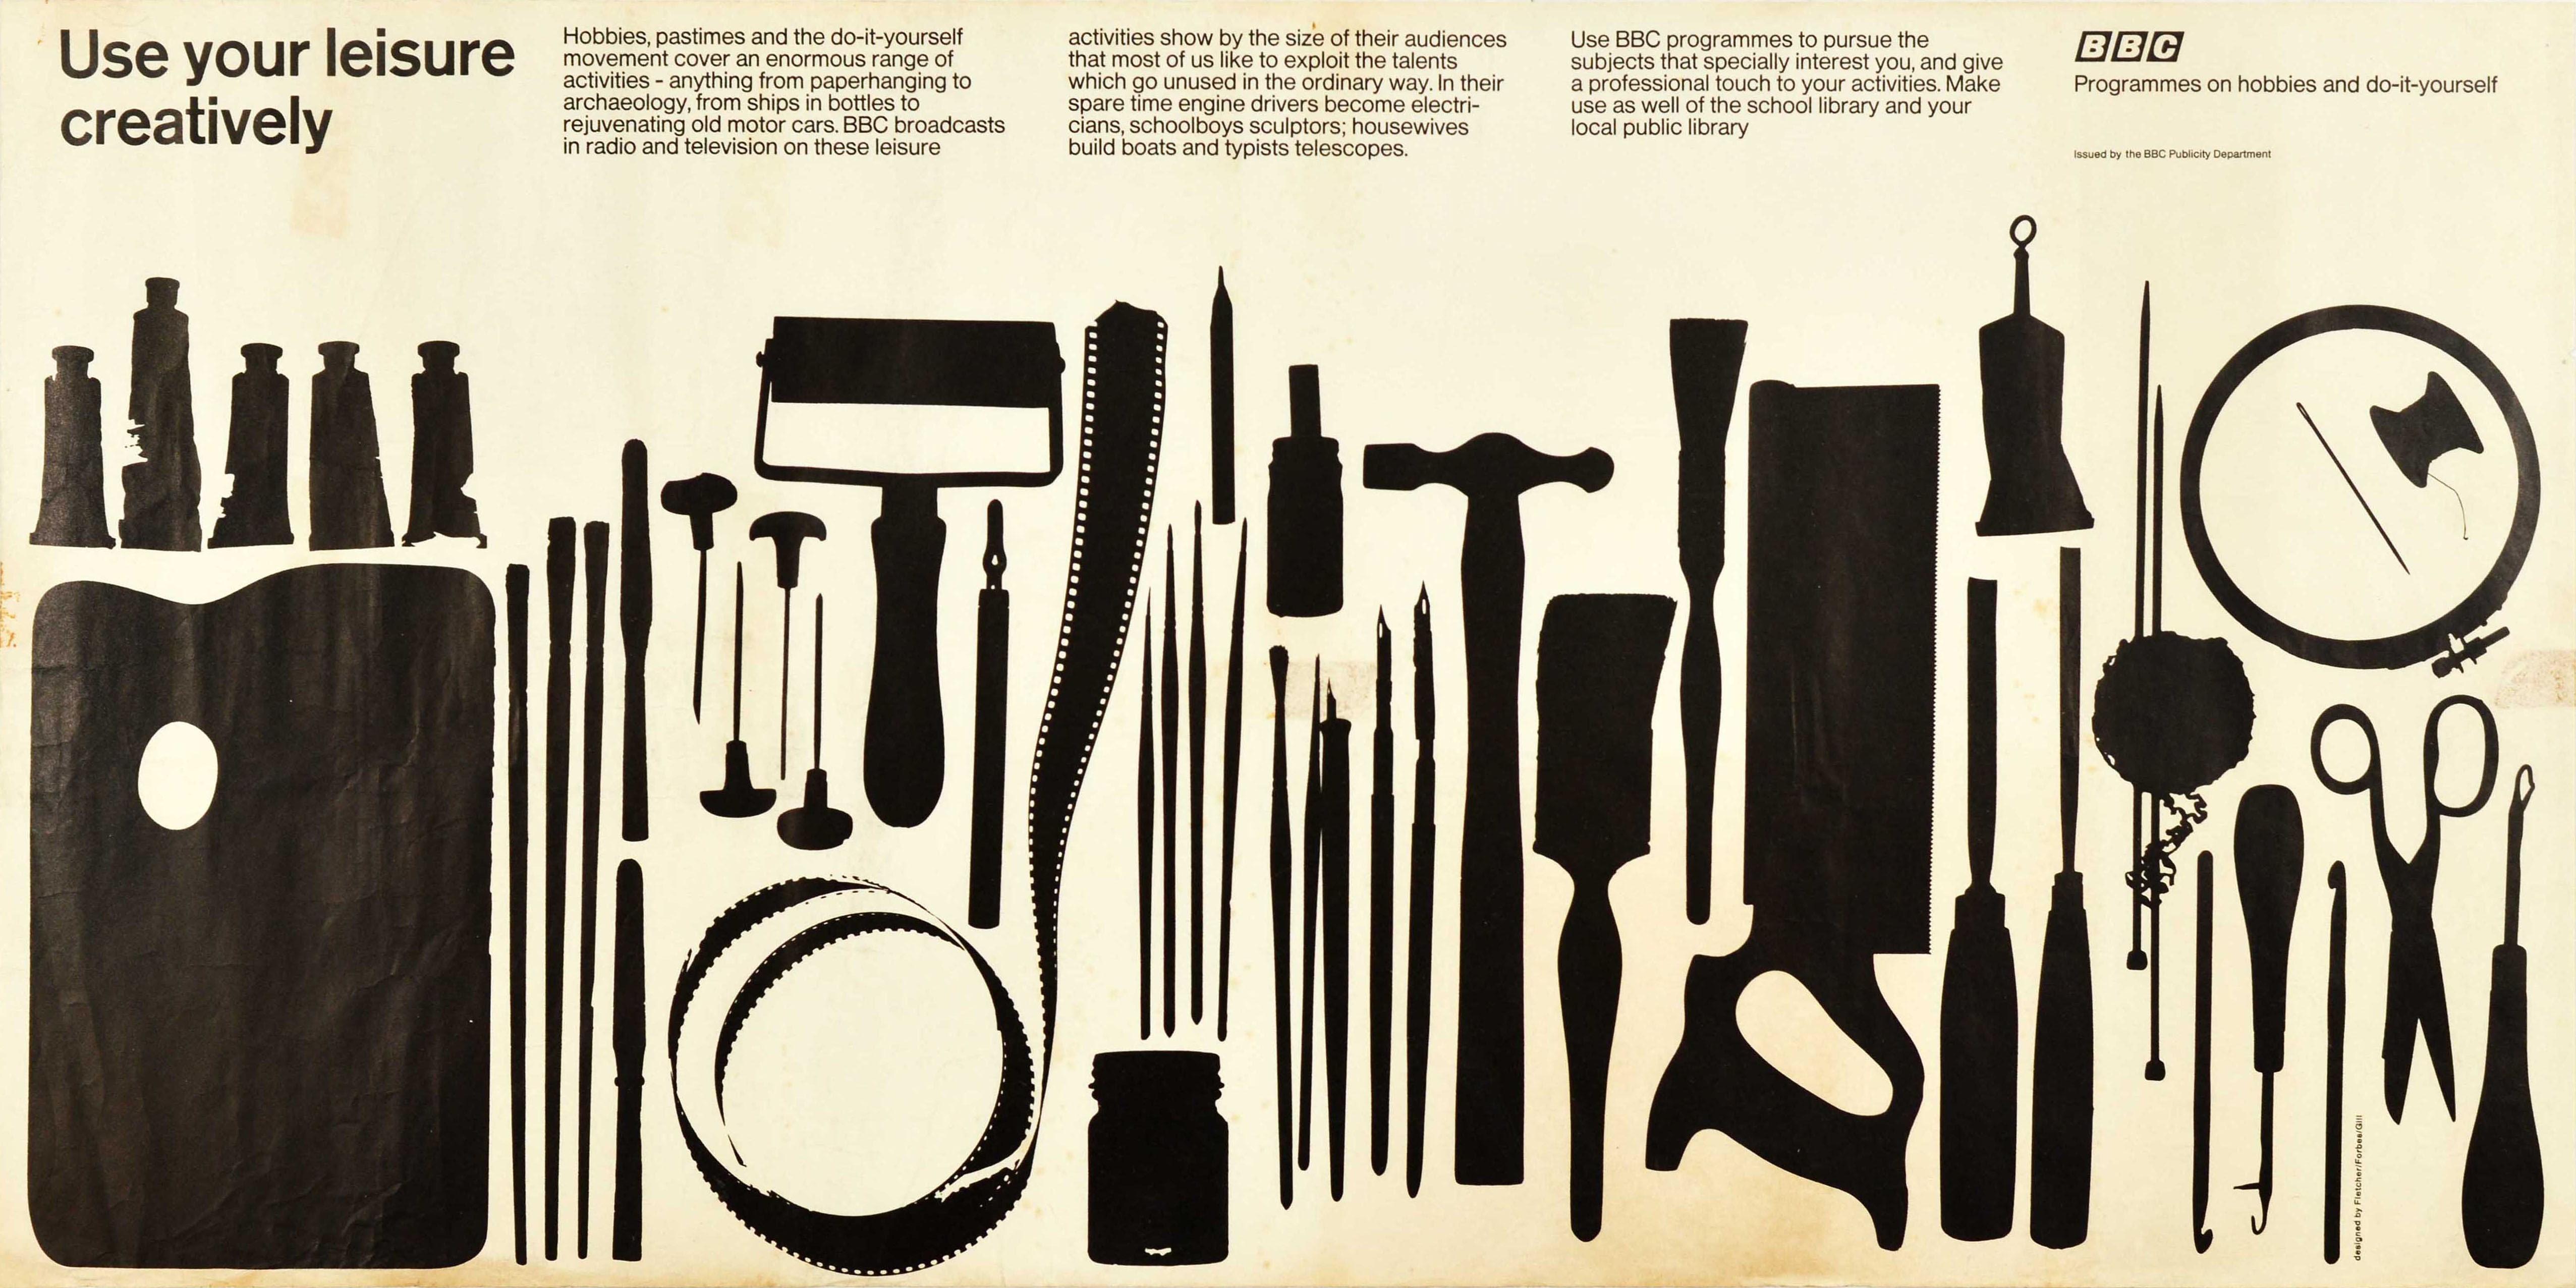 Original vintage advertising poster for BBC Programmes on Hobbies and do-it-yourself featuring black silhouettes of paint tubes, artist palette, etching and engraving equipment, cinematography film reel, drawing and ink pens, hammer and crafting